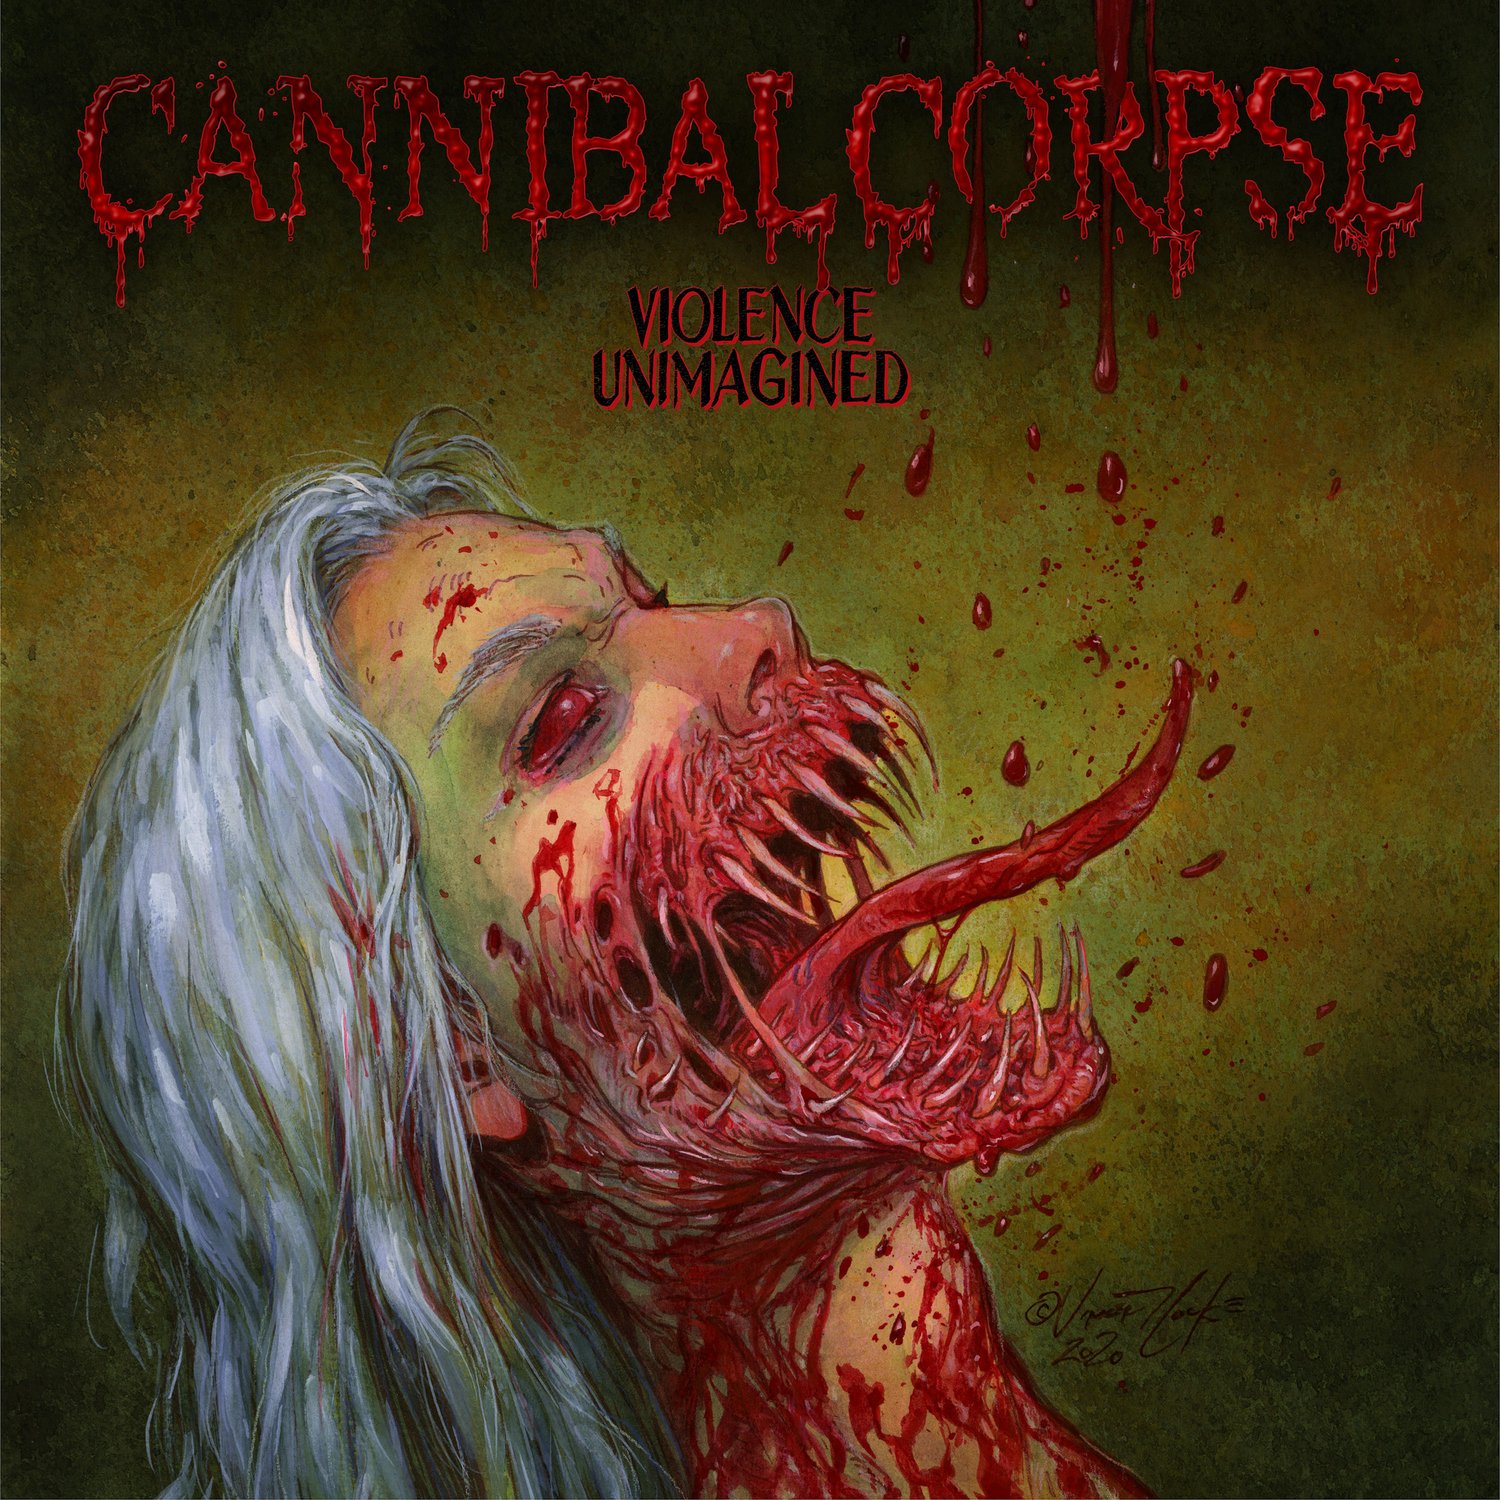 Cannibal Corpse: Violence Unimagined Album Review